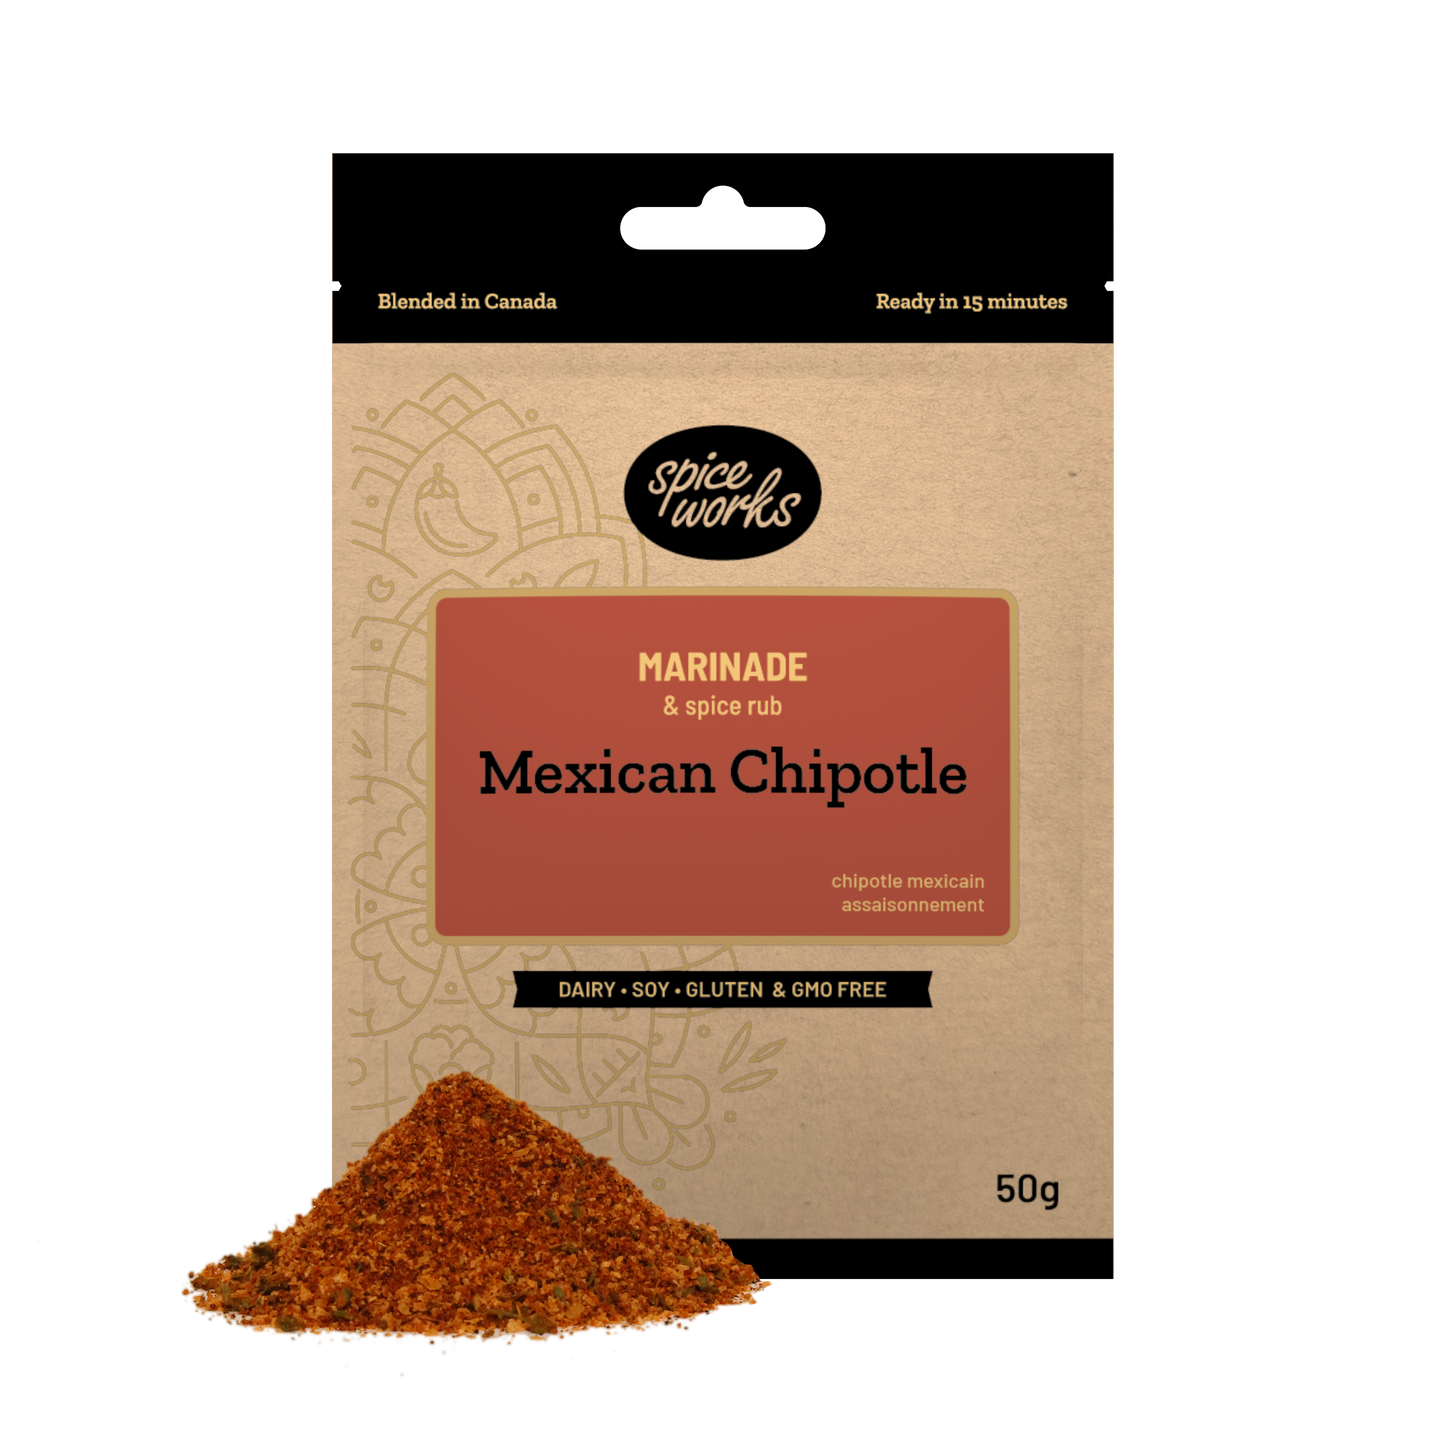 SPICE WORKS Mexican Chipotle Marinade